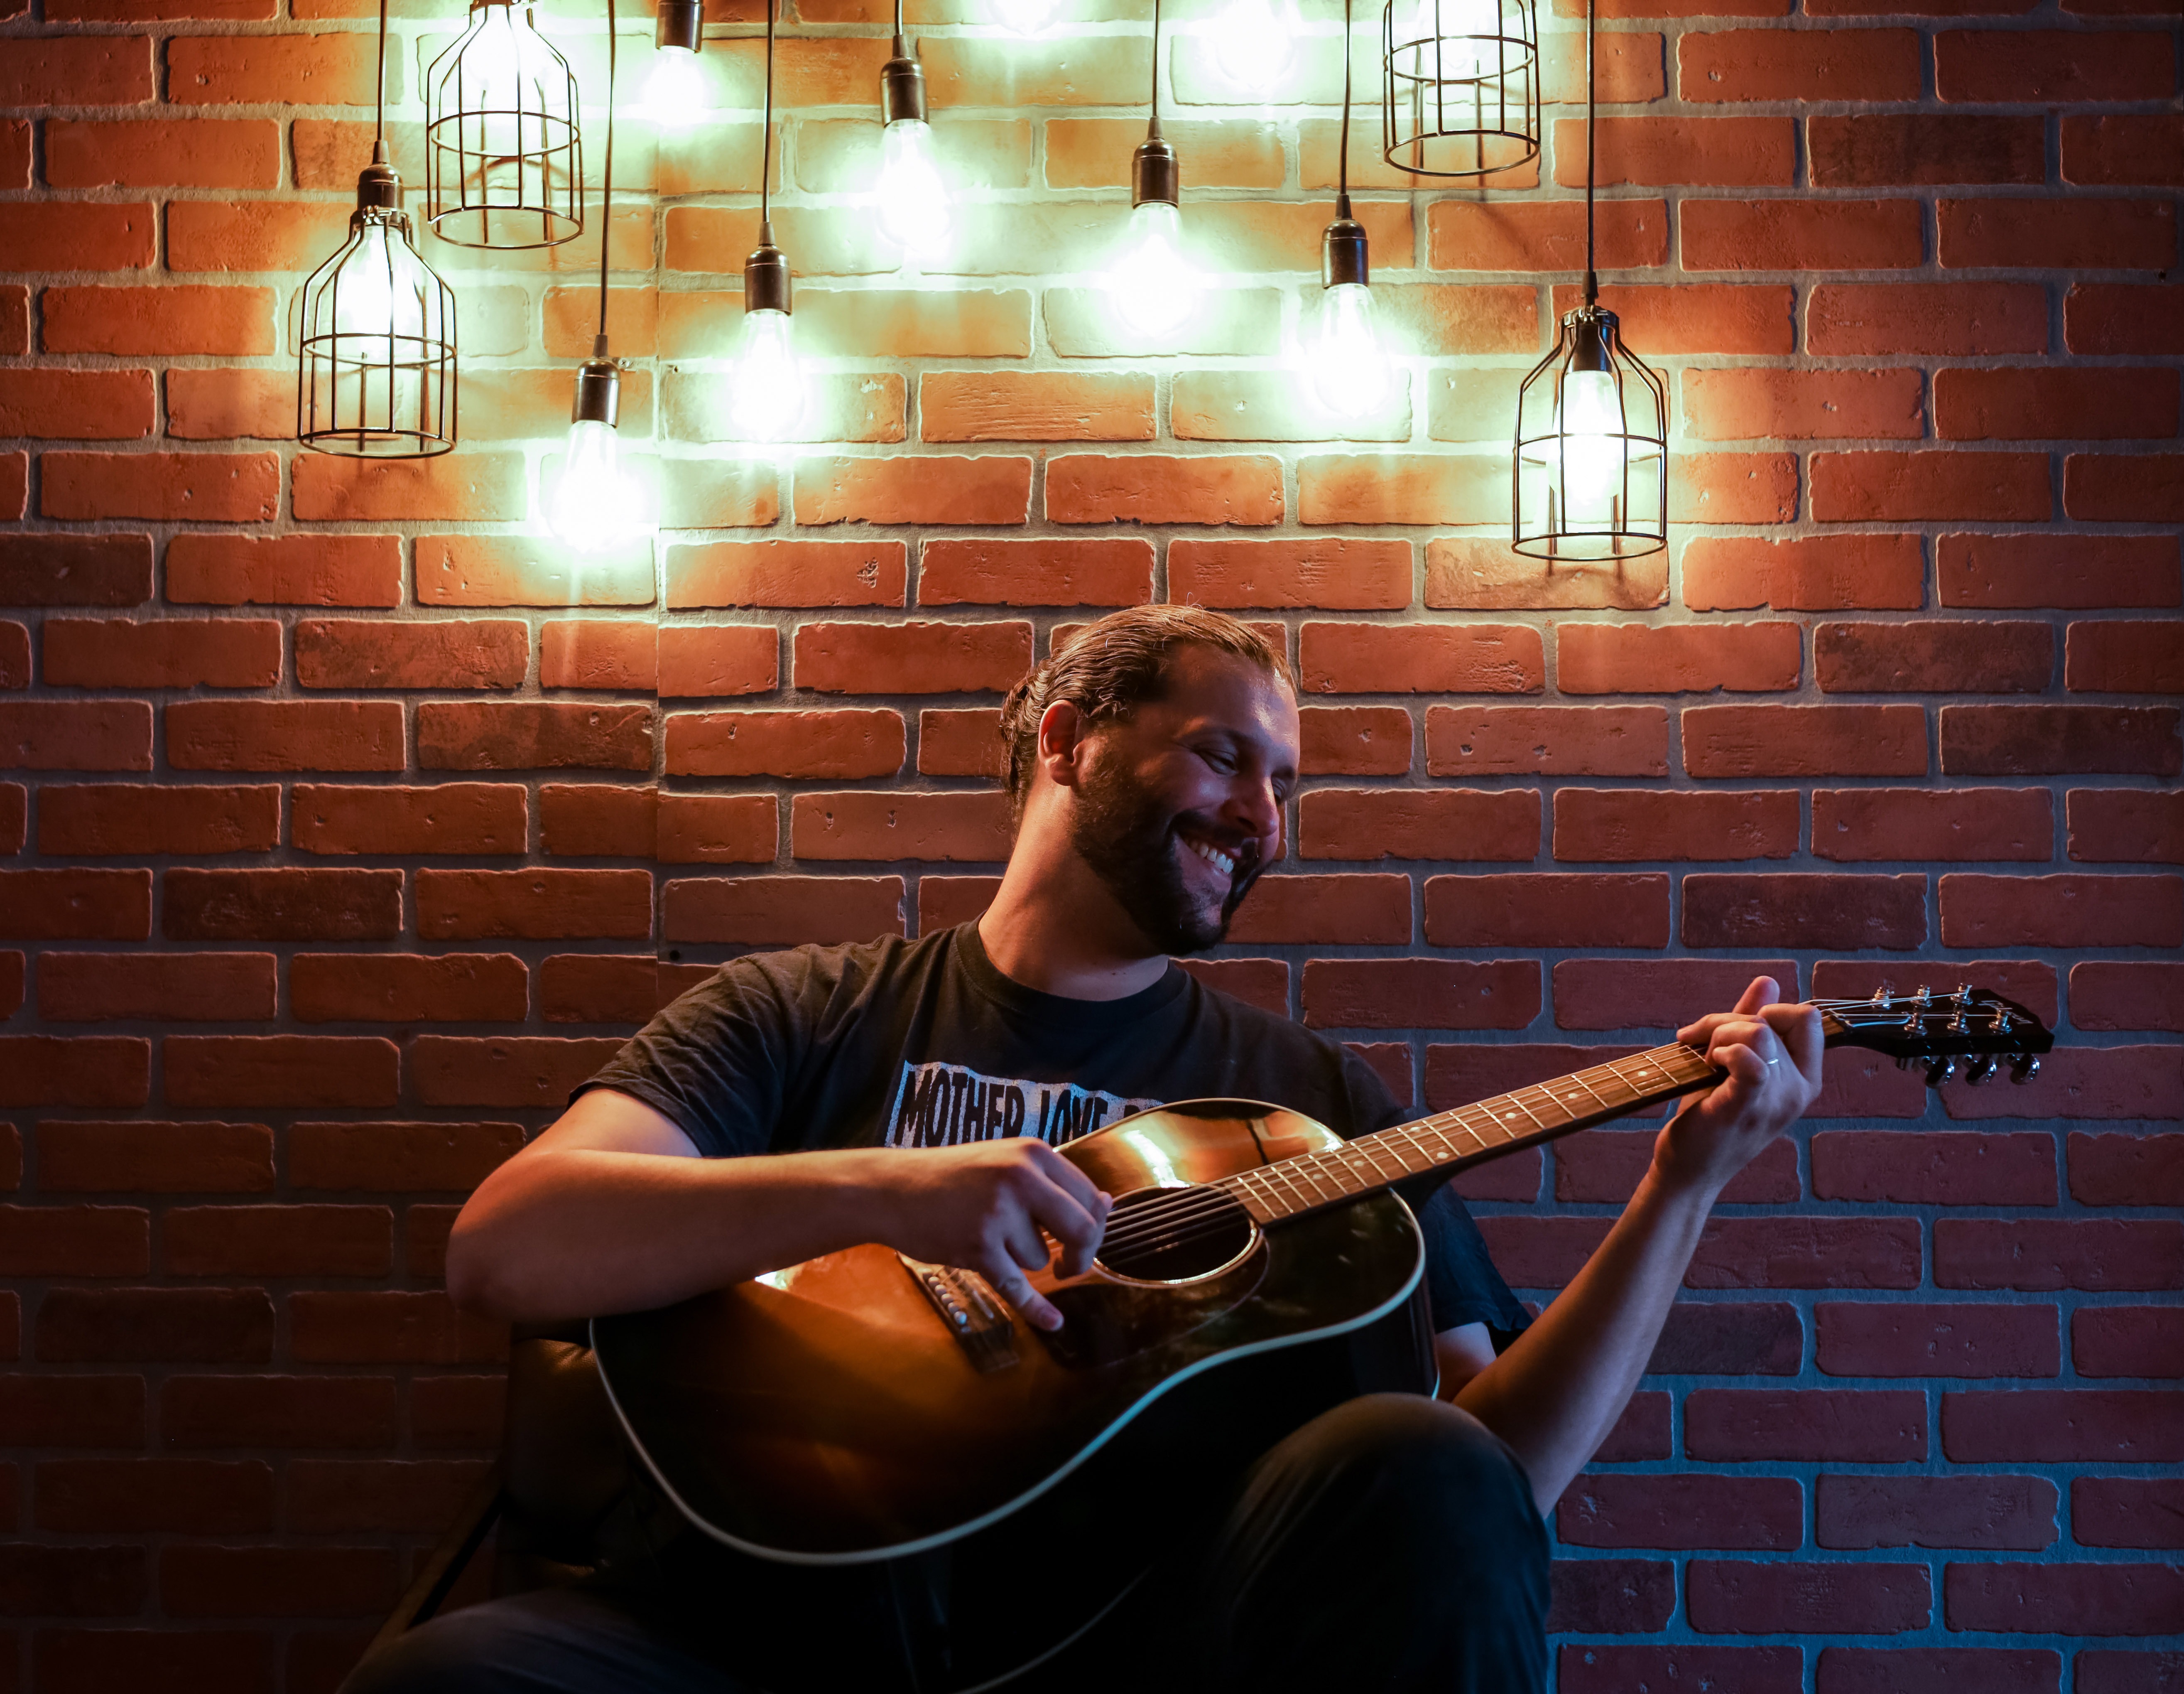 Dreamy And Melodic Vocals: Ryan Townsend Releases A Hit New Single That Syncs With The Hearts And Minds Of The Masses.